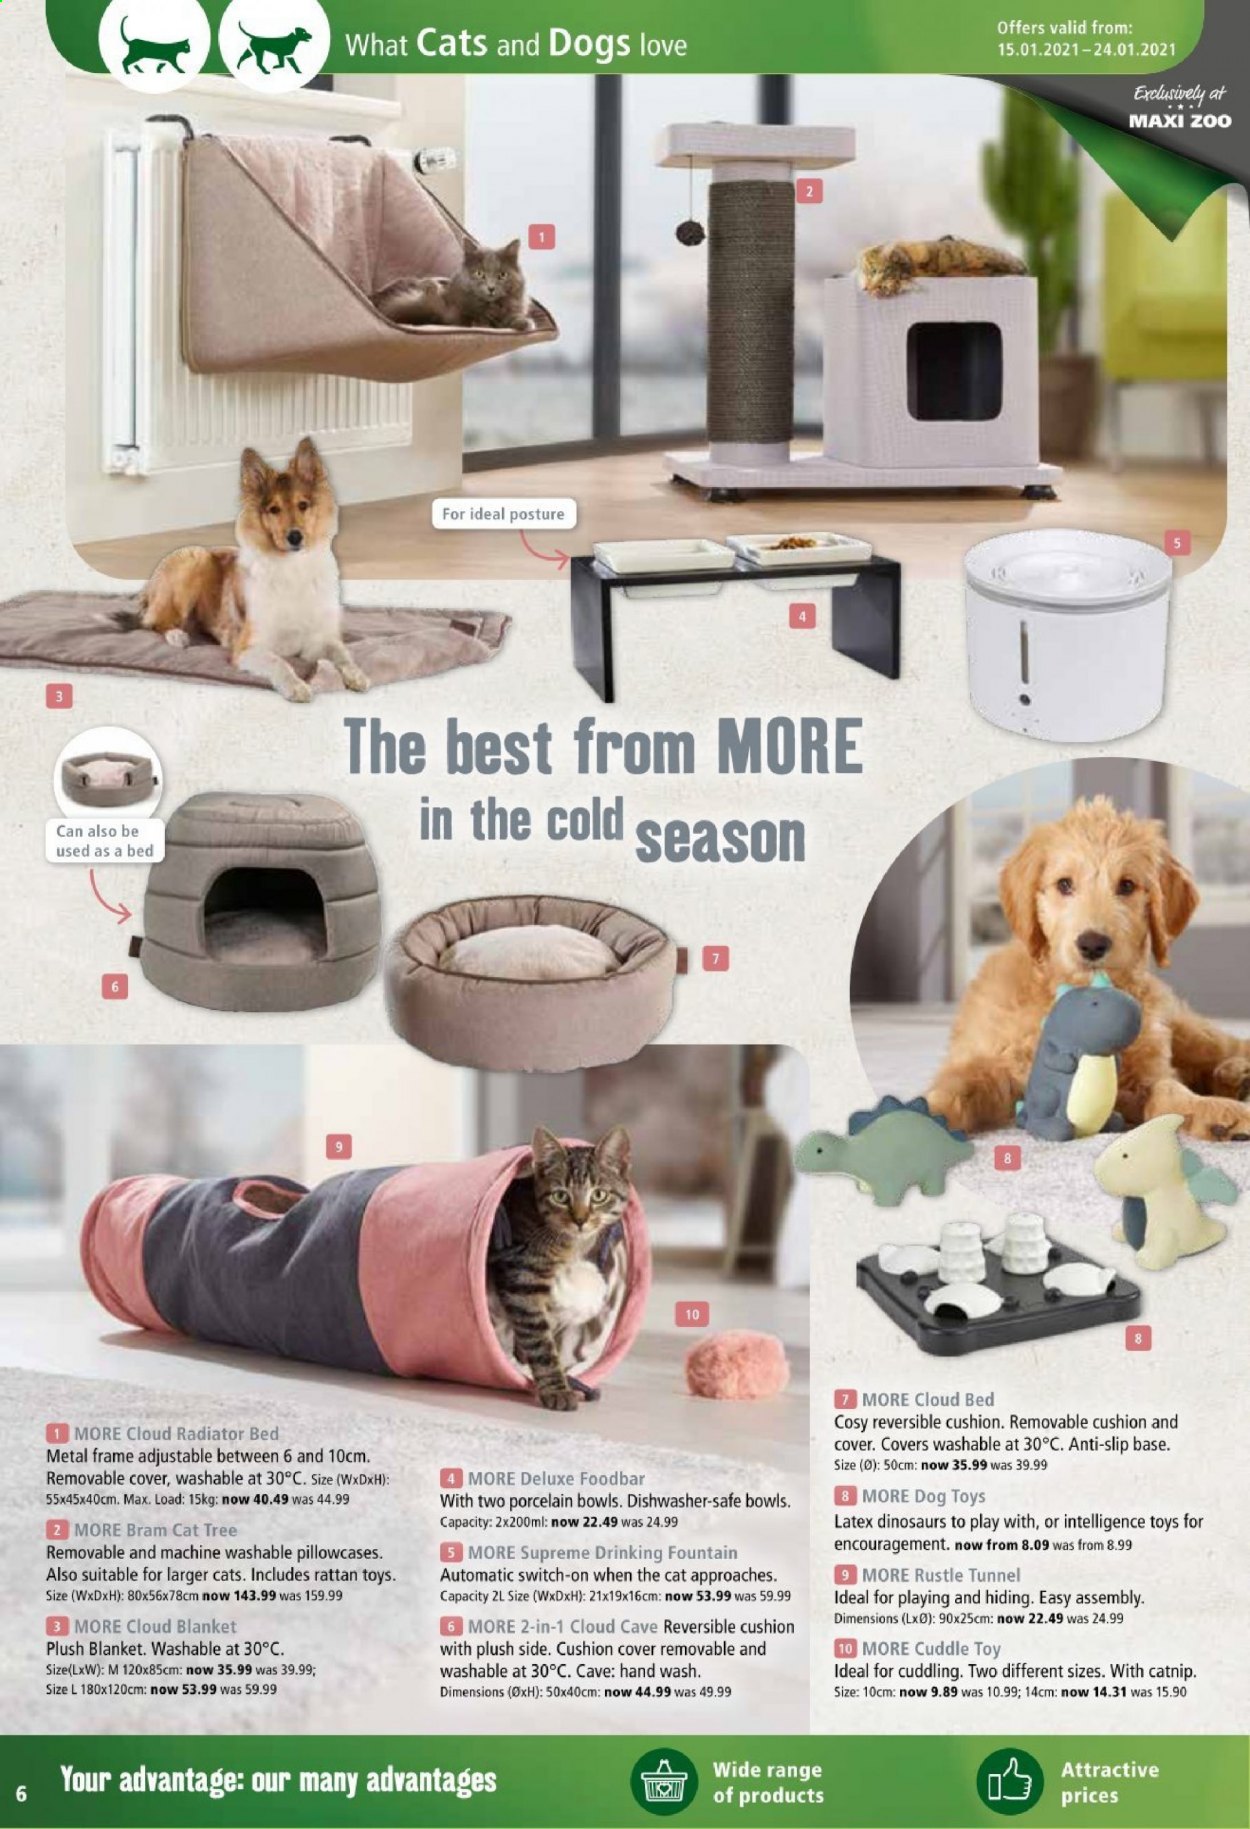 thumbnail - Maxi Zoo offer  - 15.01.2021 - 24.01.2021 - Sales products - blanket, cushion, pet bed, cat toy, dog toy, foodbar, cat tree, rustle tunnel. Page 6.